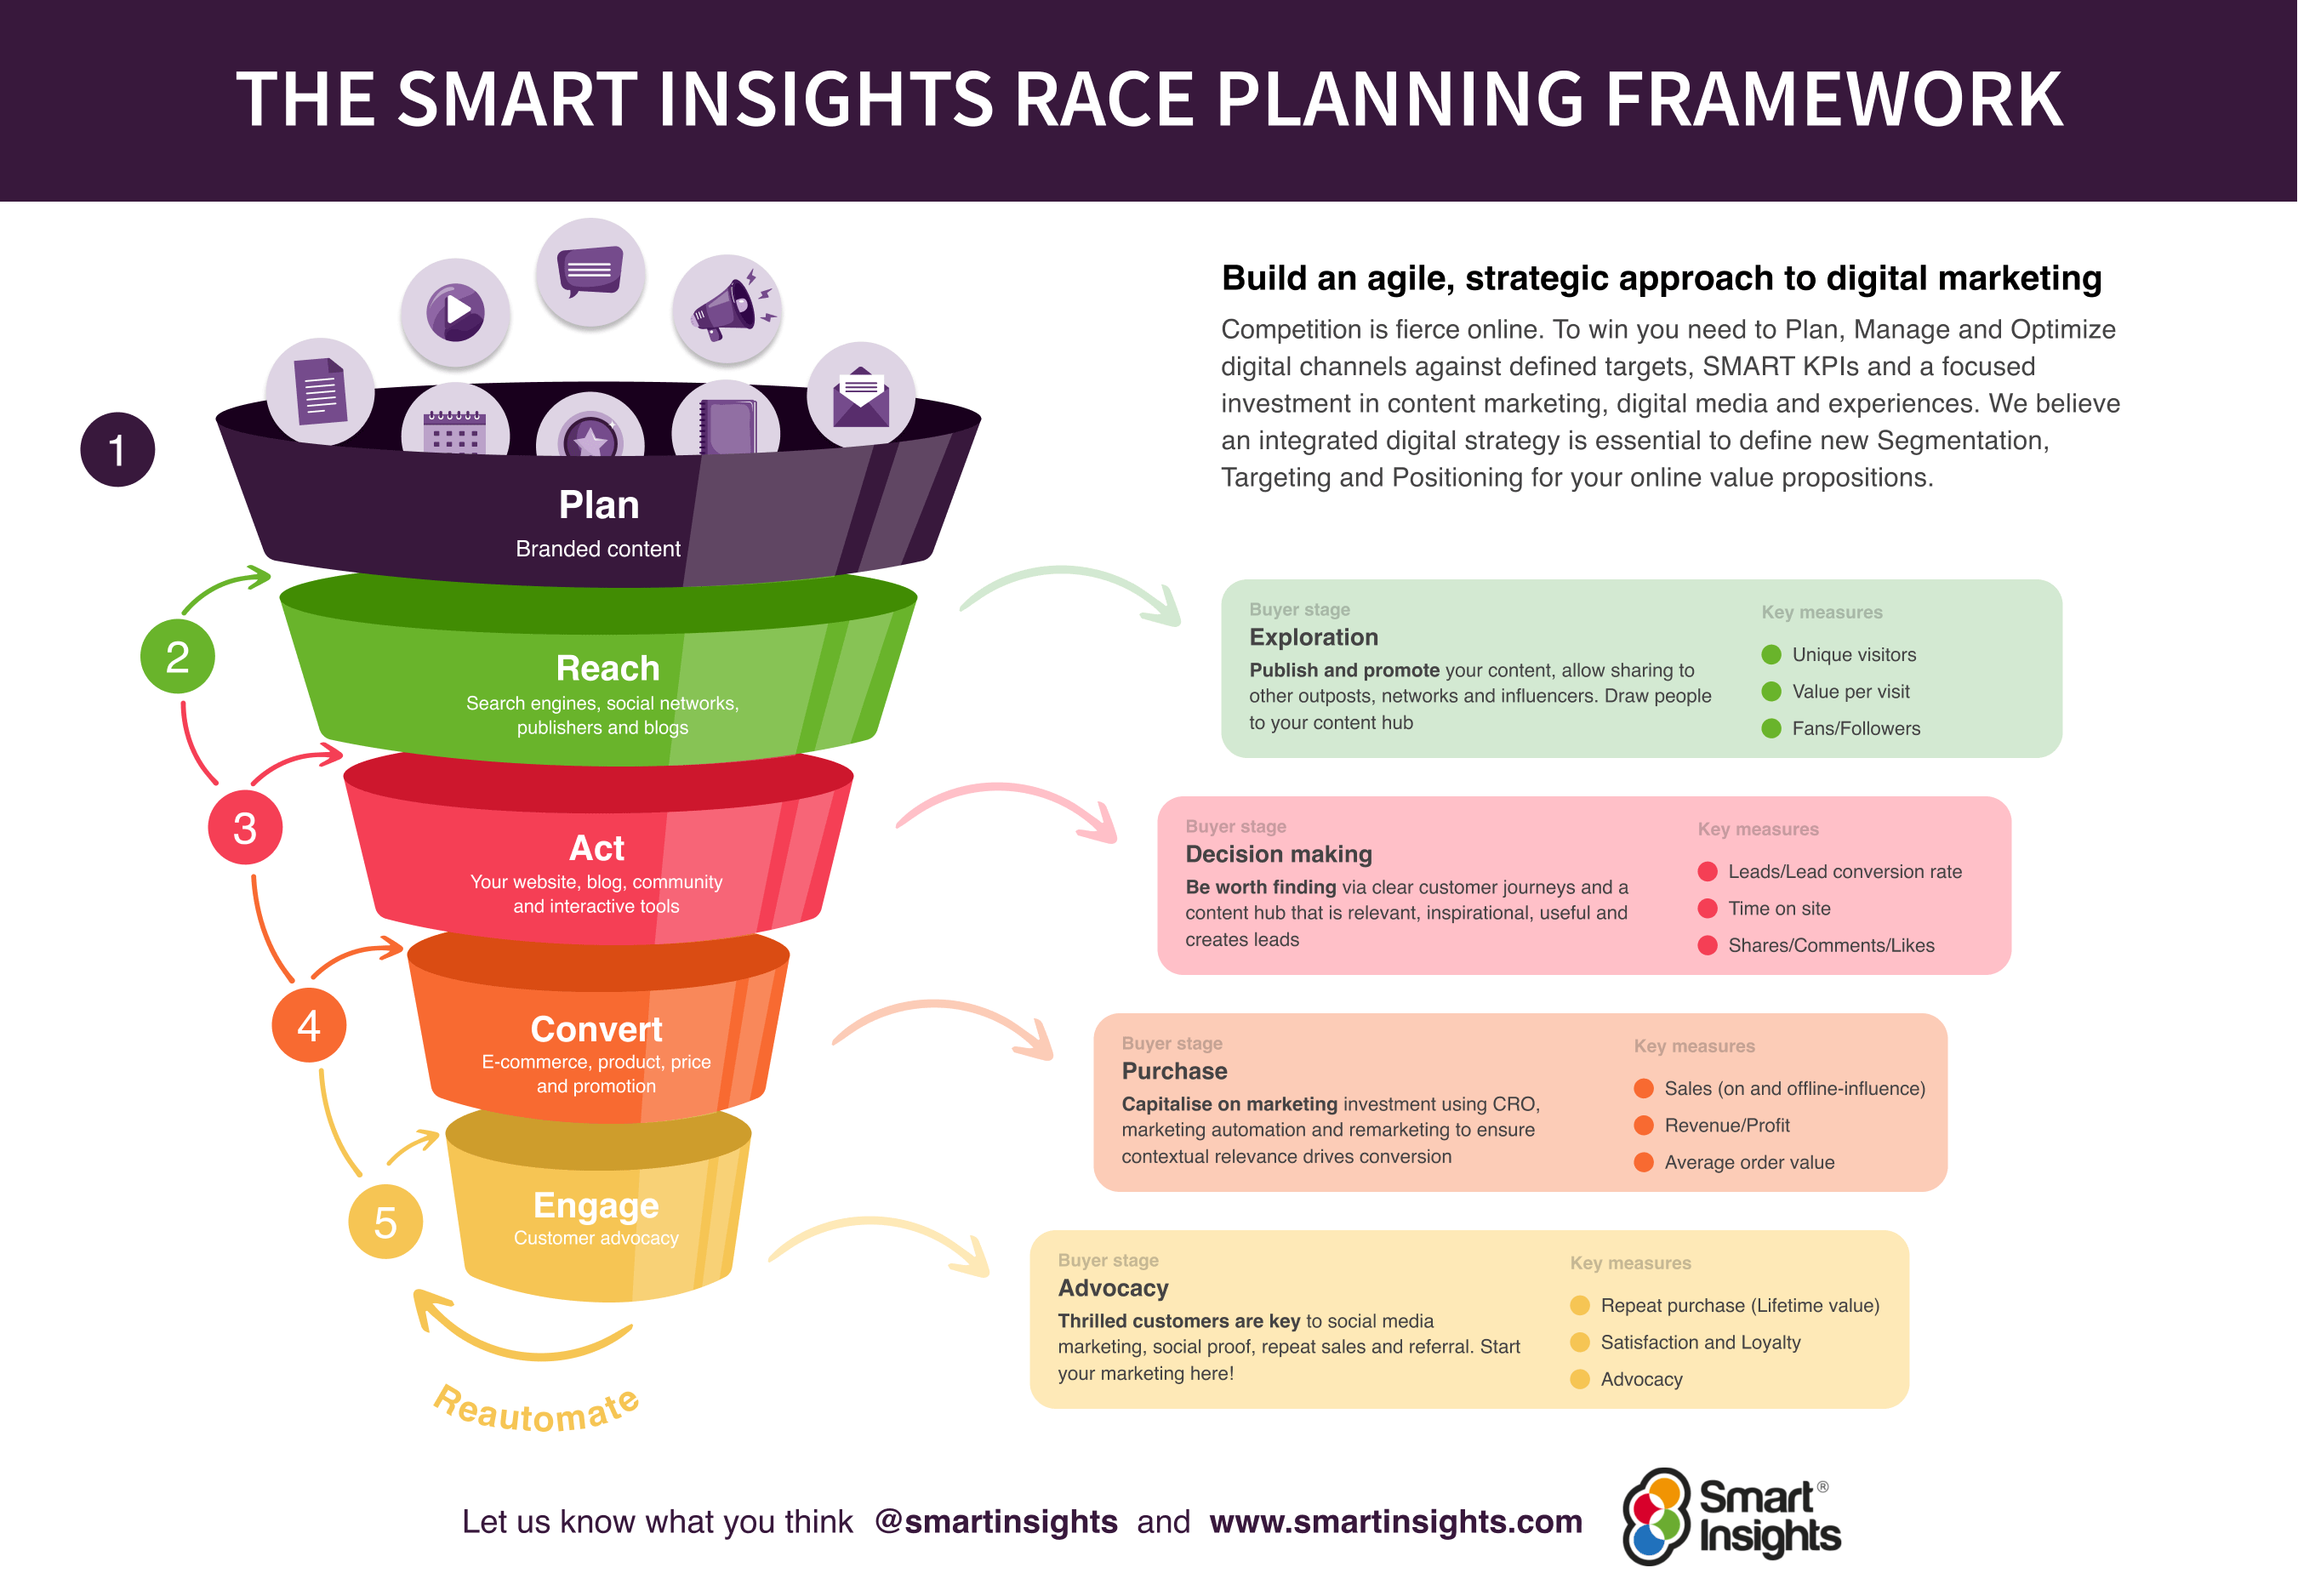  A framework for digital marketing strategy, showing the steps from planning to reach, act, convert, engage, and automate, with key performance indicators for each stage.